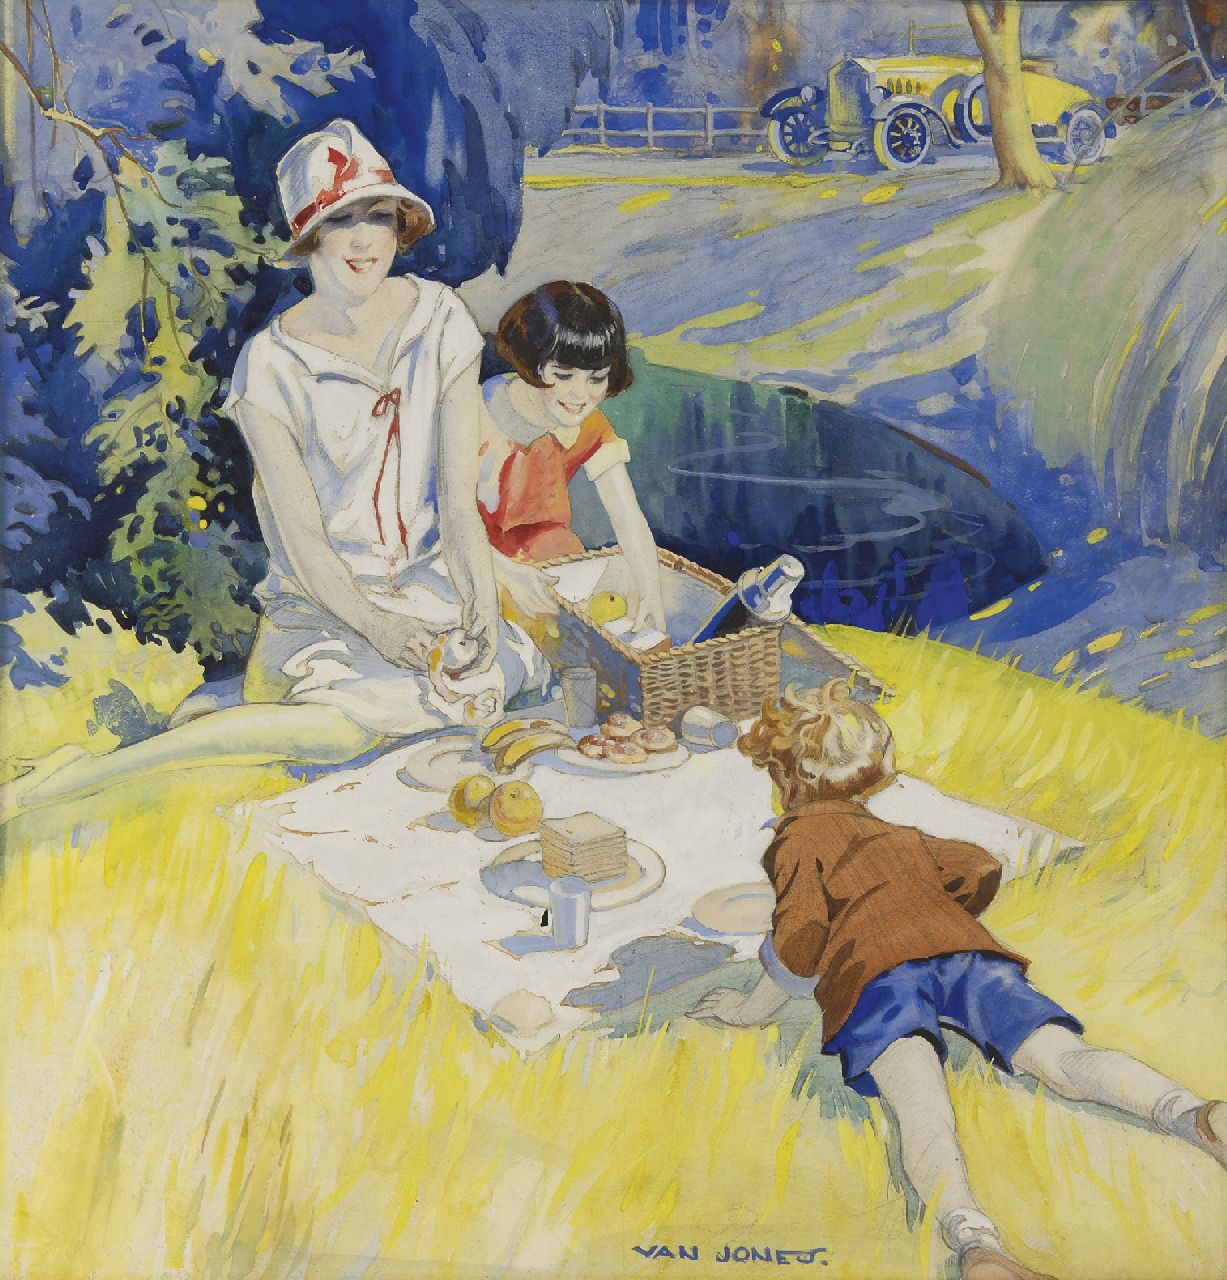 Van Jones | The picknick (possibly with the Rolls-Royce Silver Ghost Playboy Roadster 1926), gouache on board, 51.4 x 49.5 cm, signed l.c.